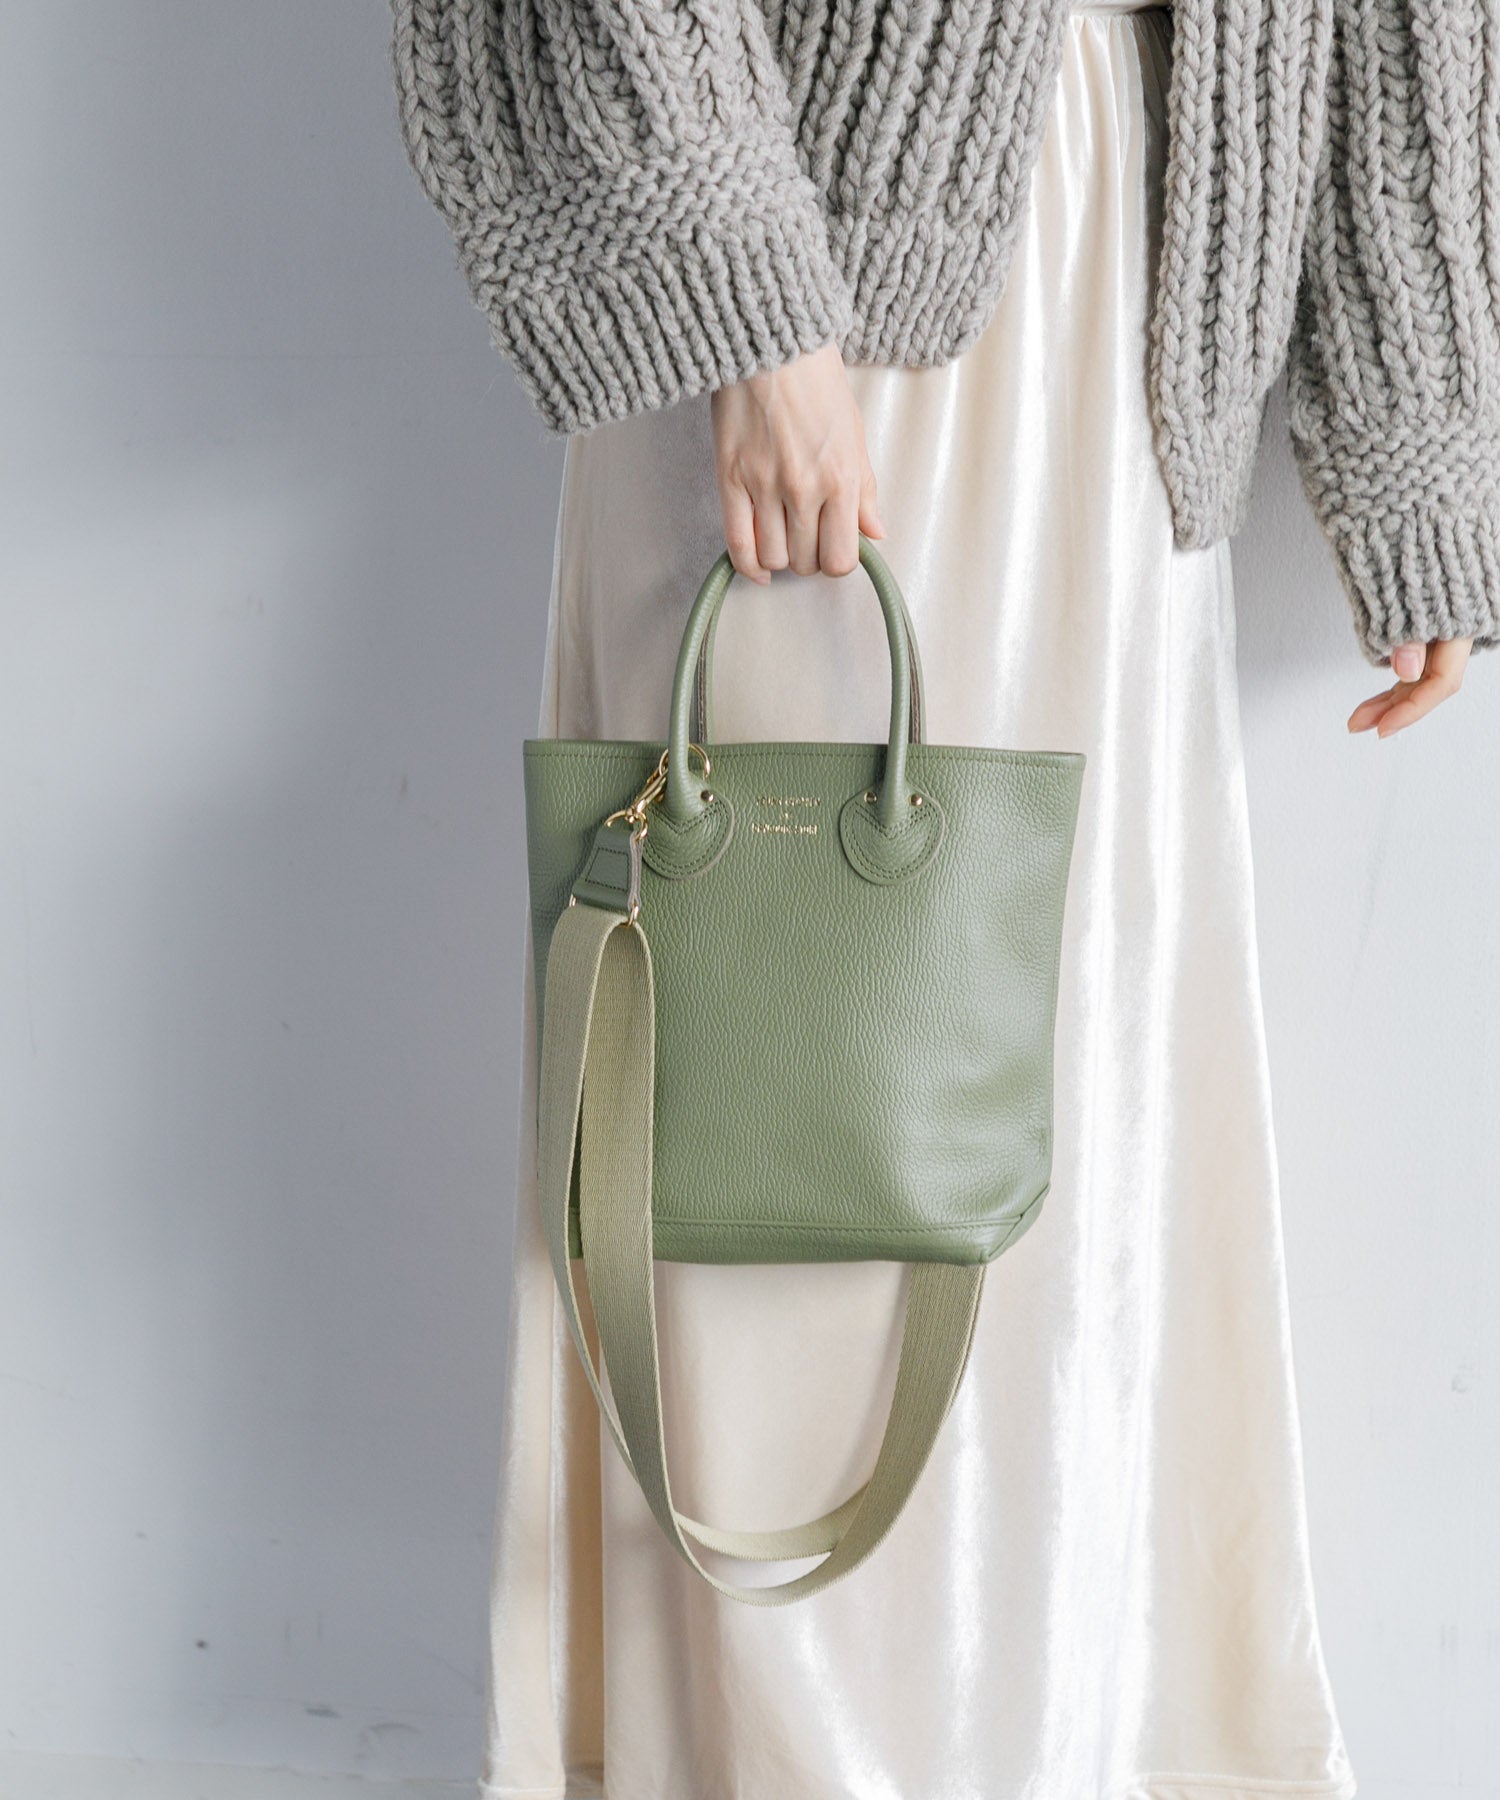 【WOMEN】YOUNG & OLSEN TDS EMBOSSED LEATHER HAVERSACK S